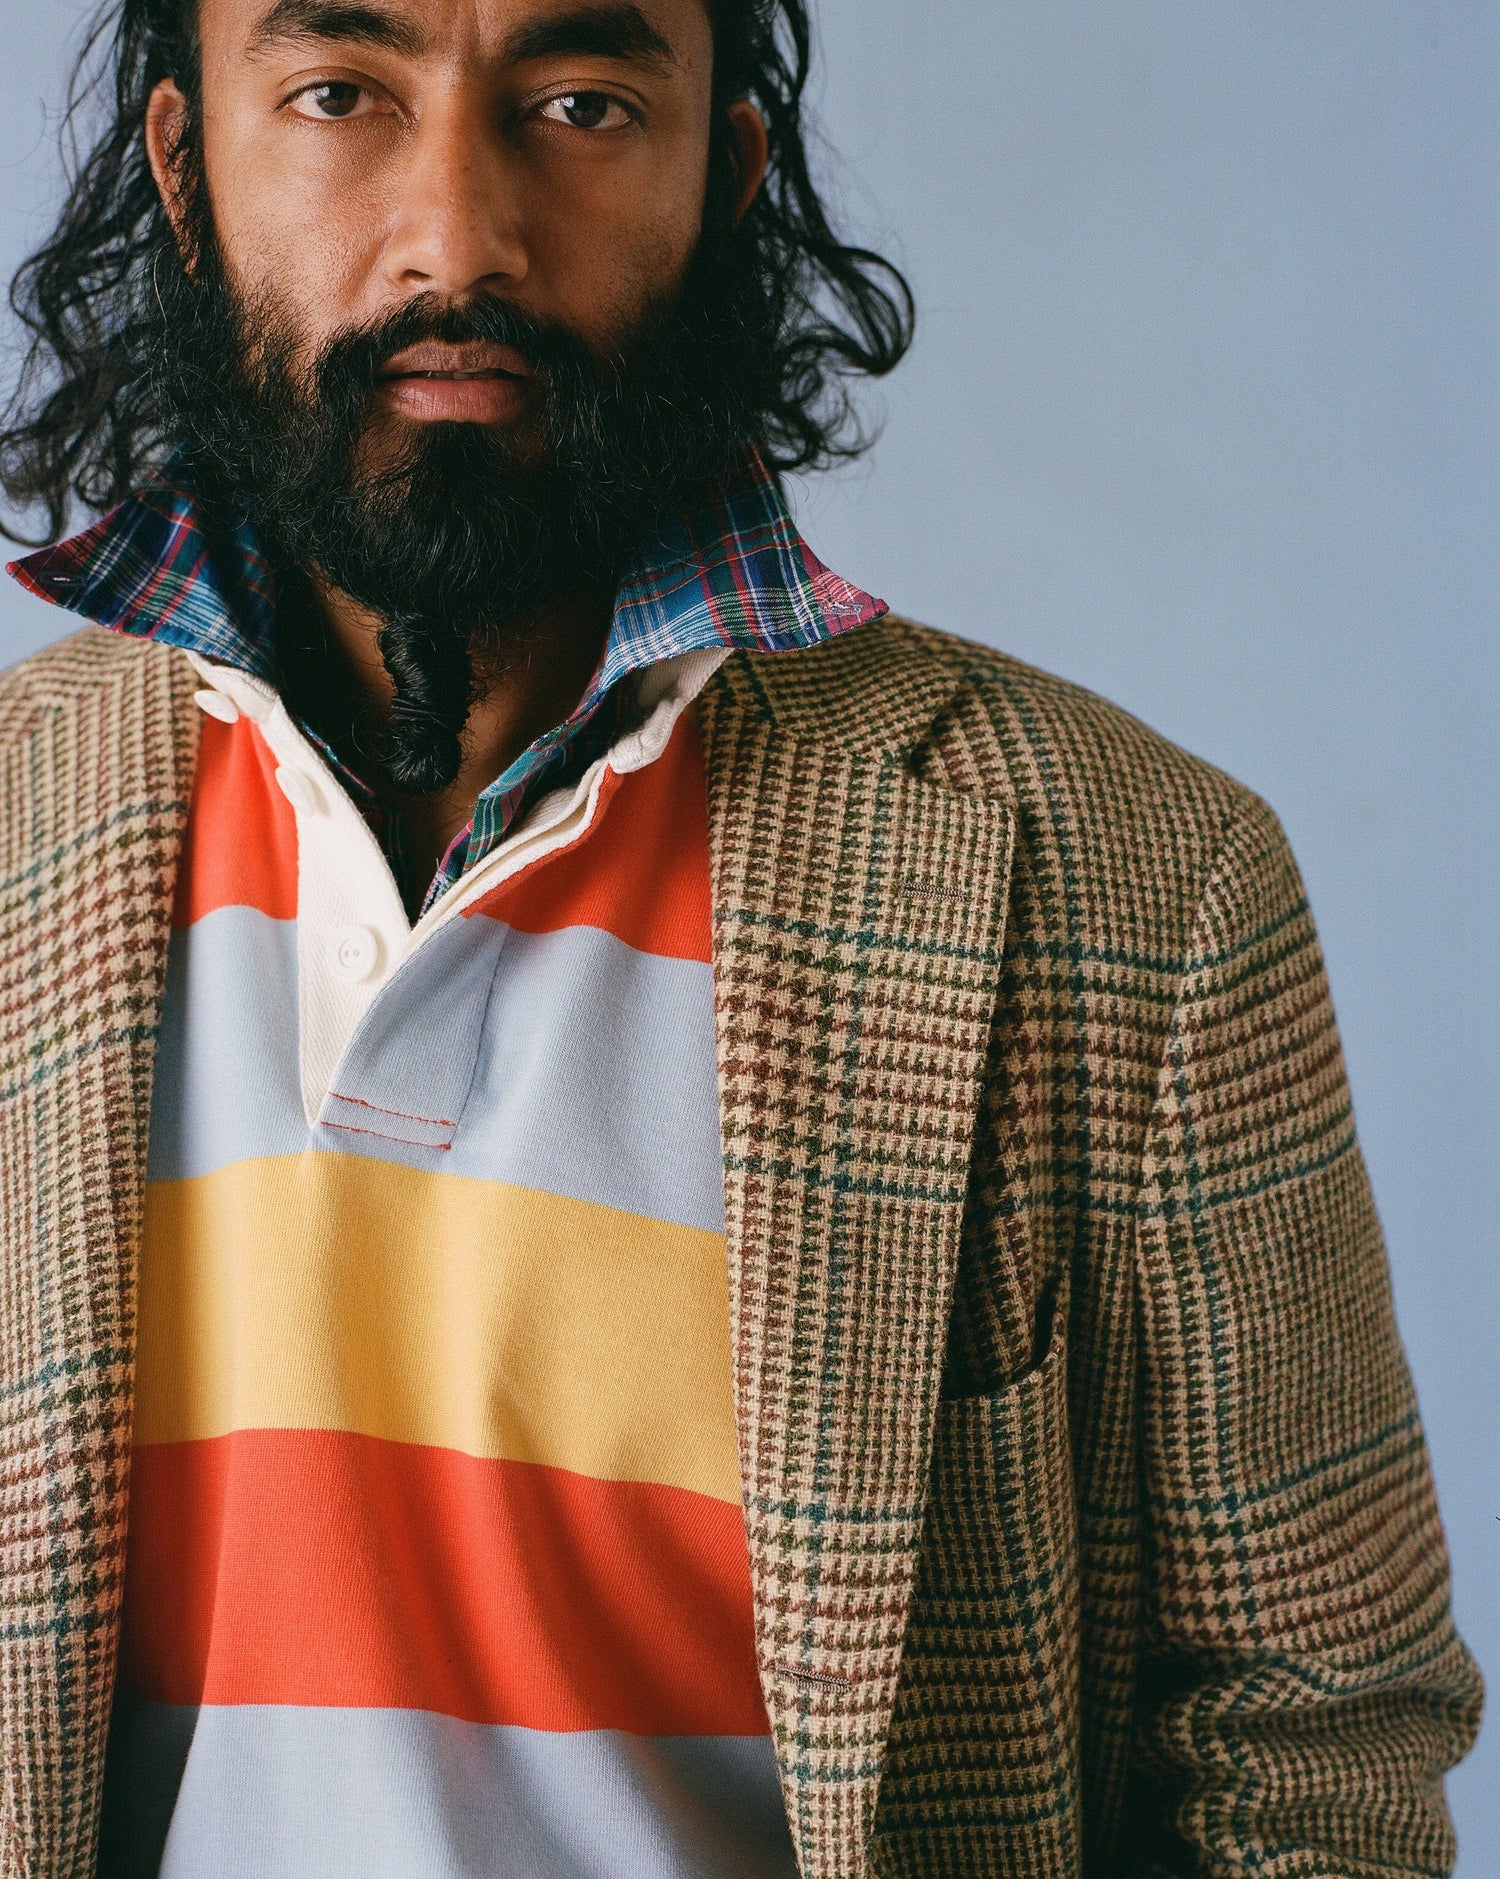 Yellow, Blue and Red Stripe Cotton Rugby Shirt